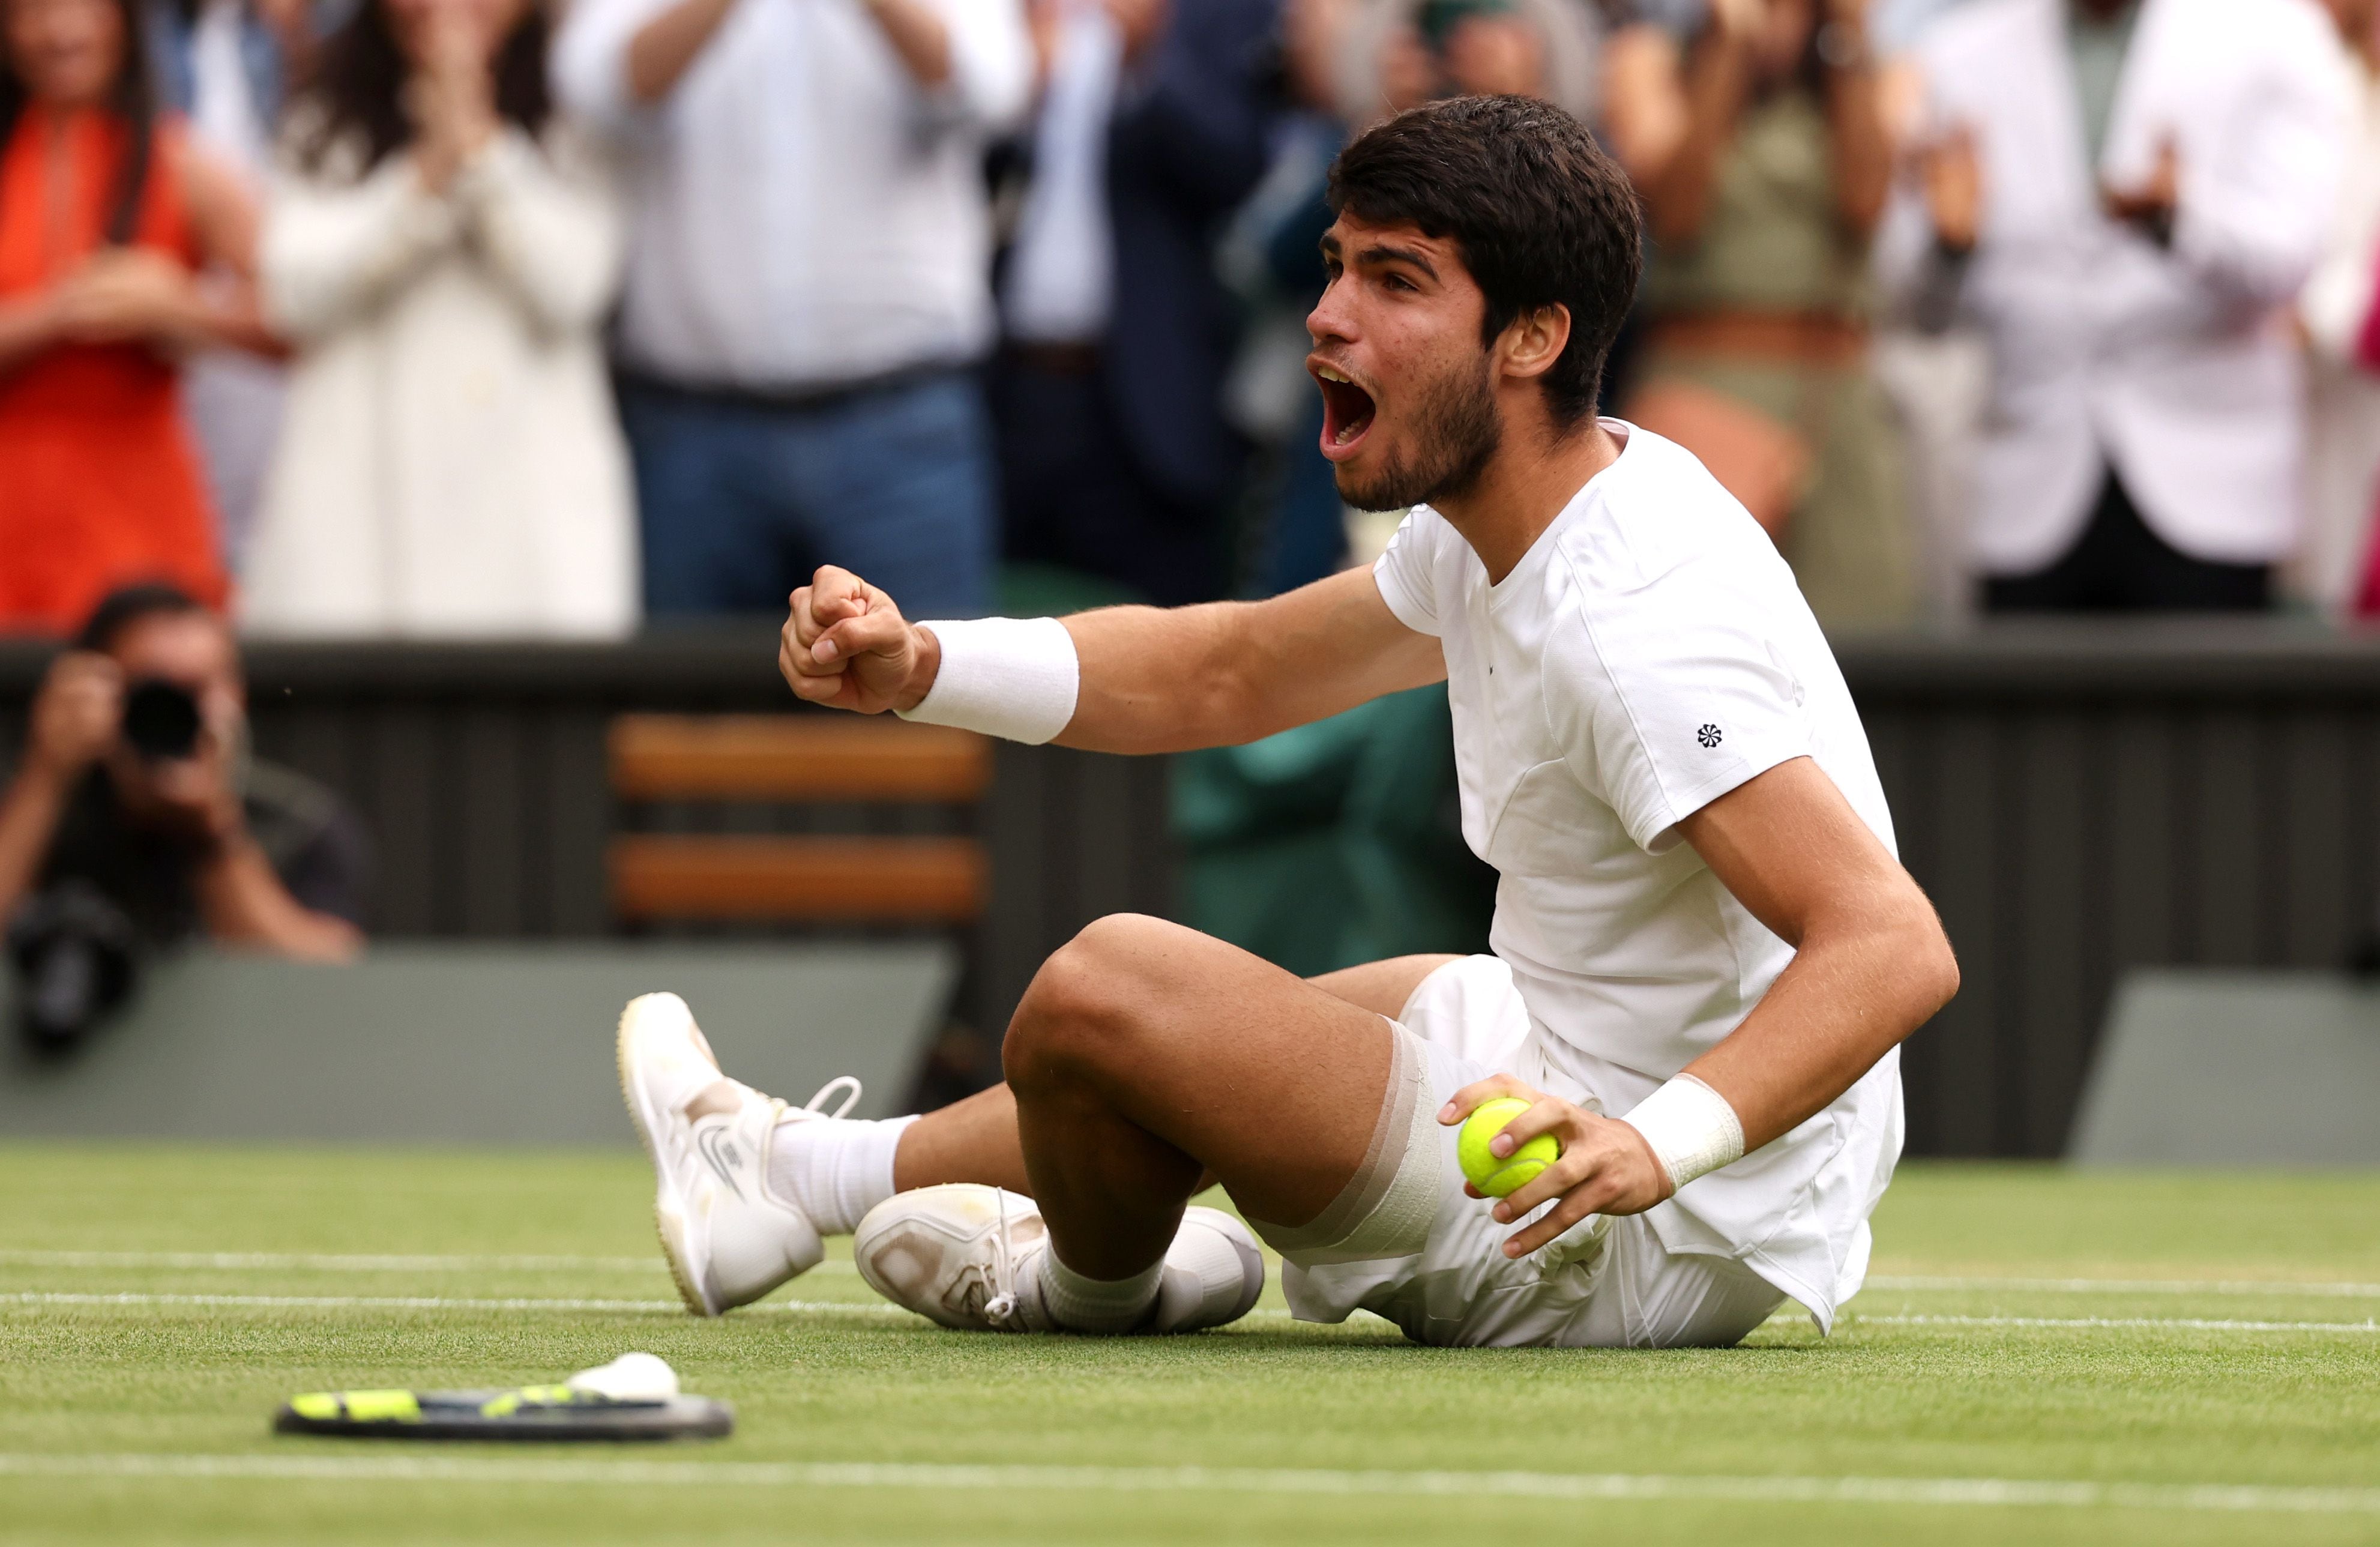 Wimbledon 2023: A golden opportunity for Djokovic to equal